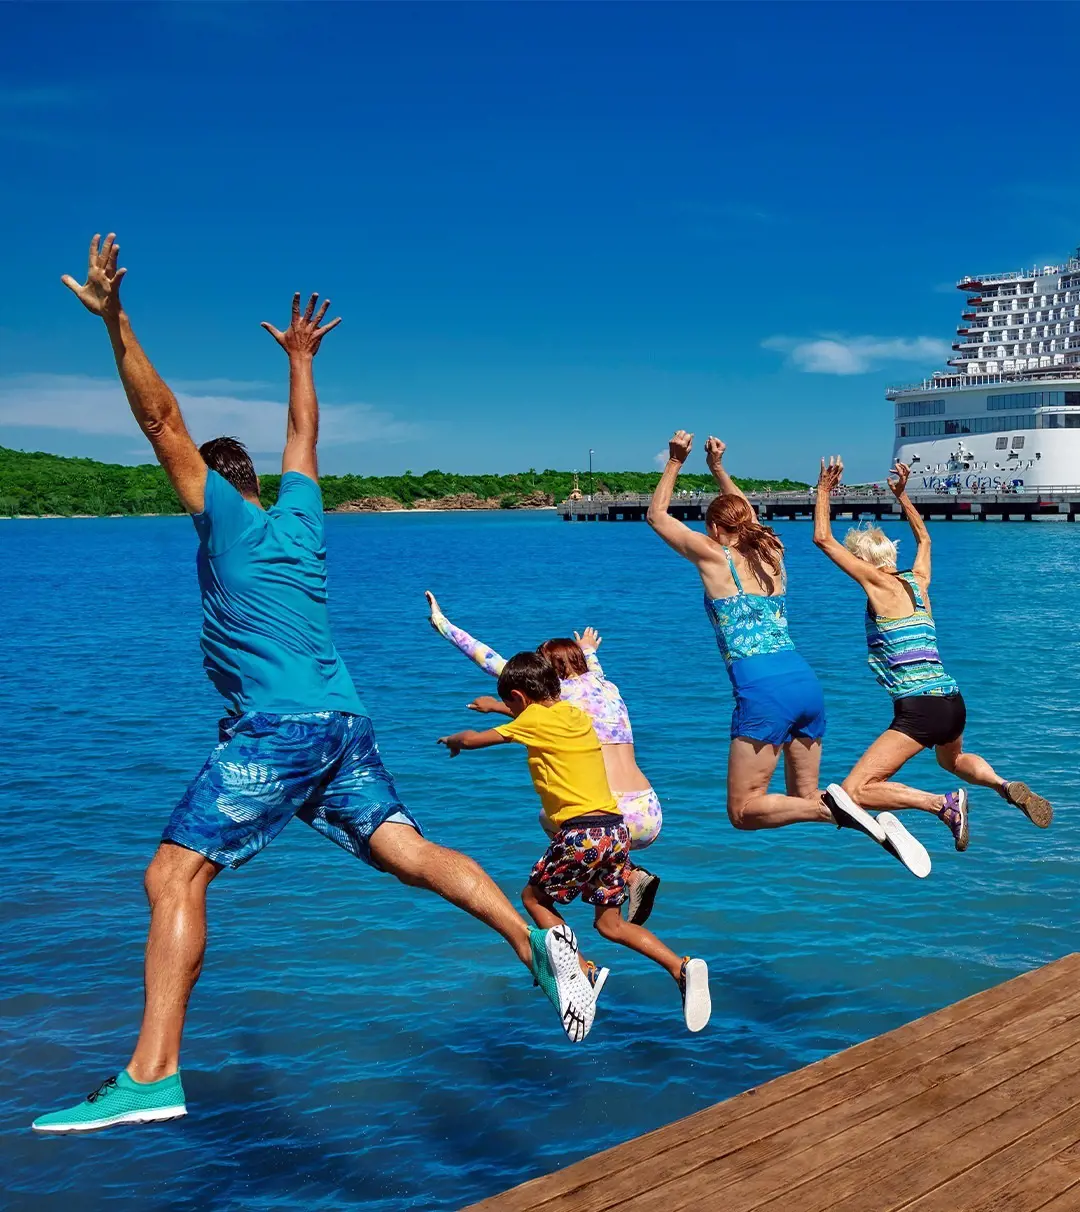 Carnival cruise offers full enjoyment to vacationers.